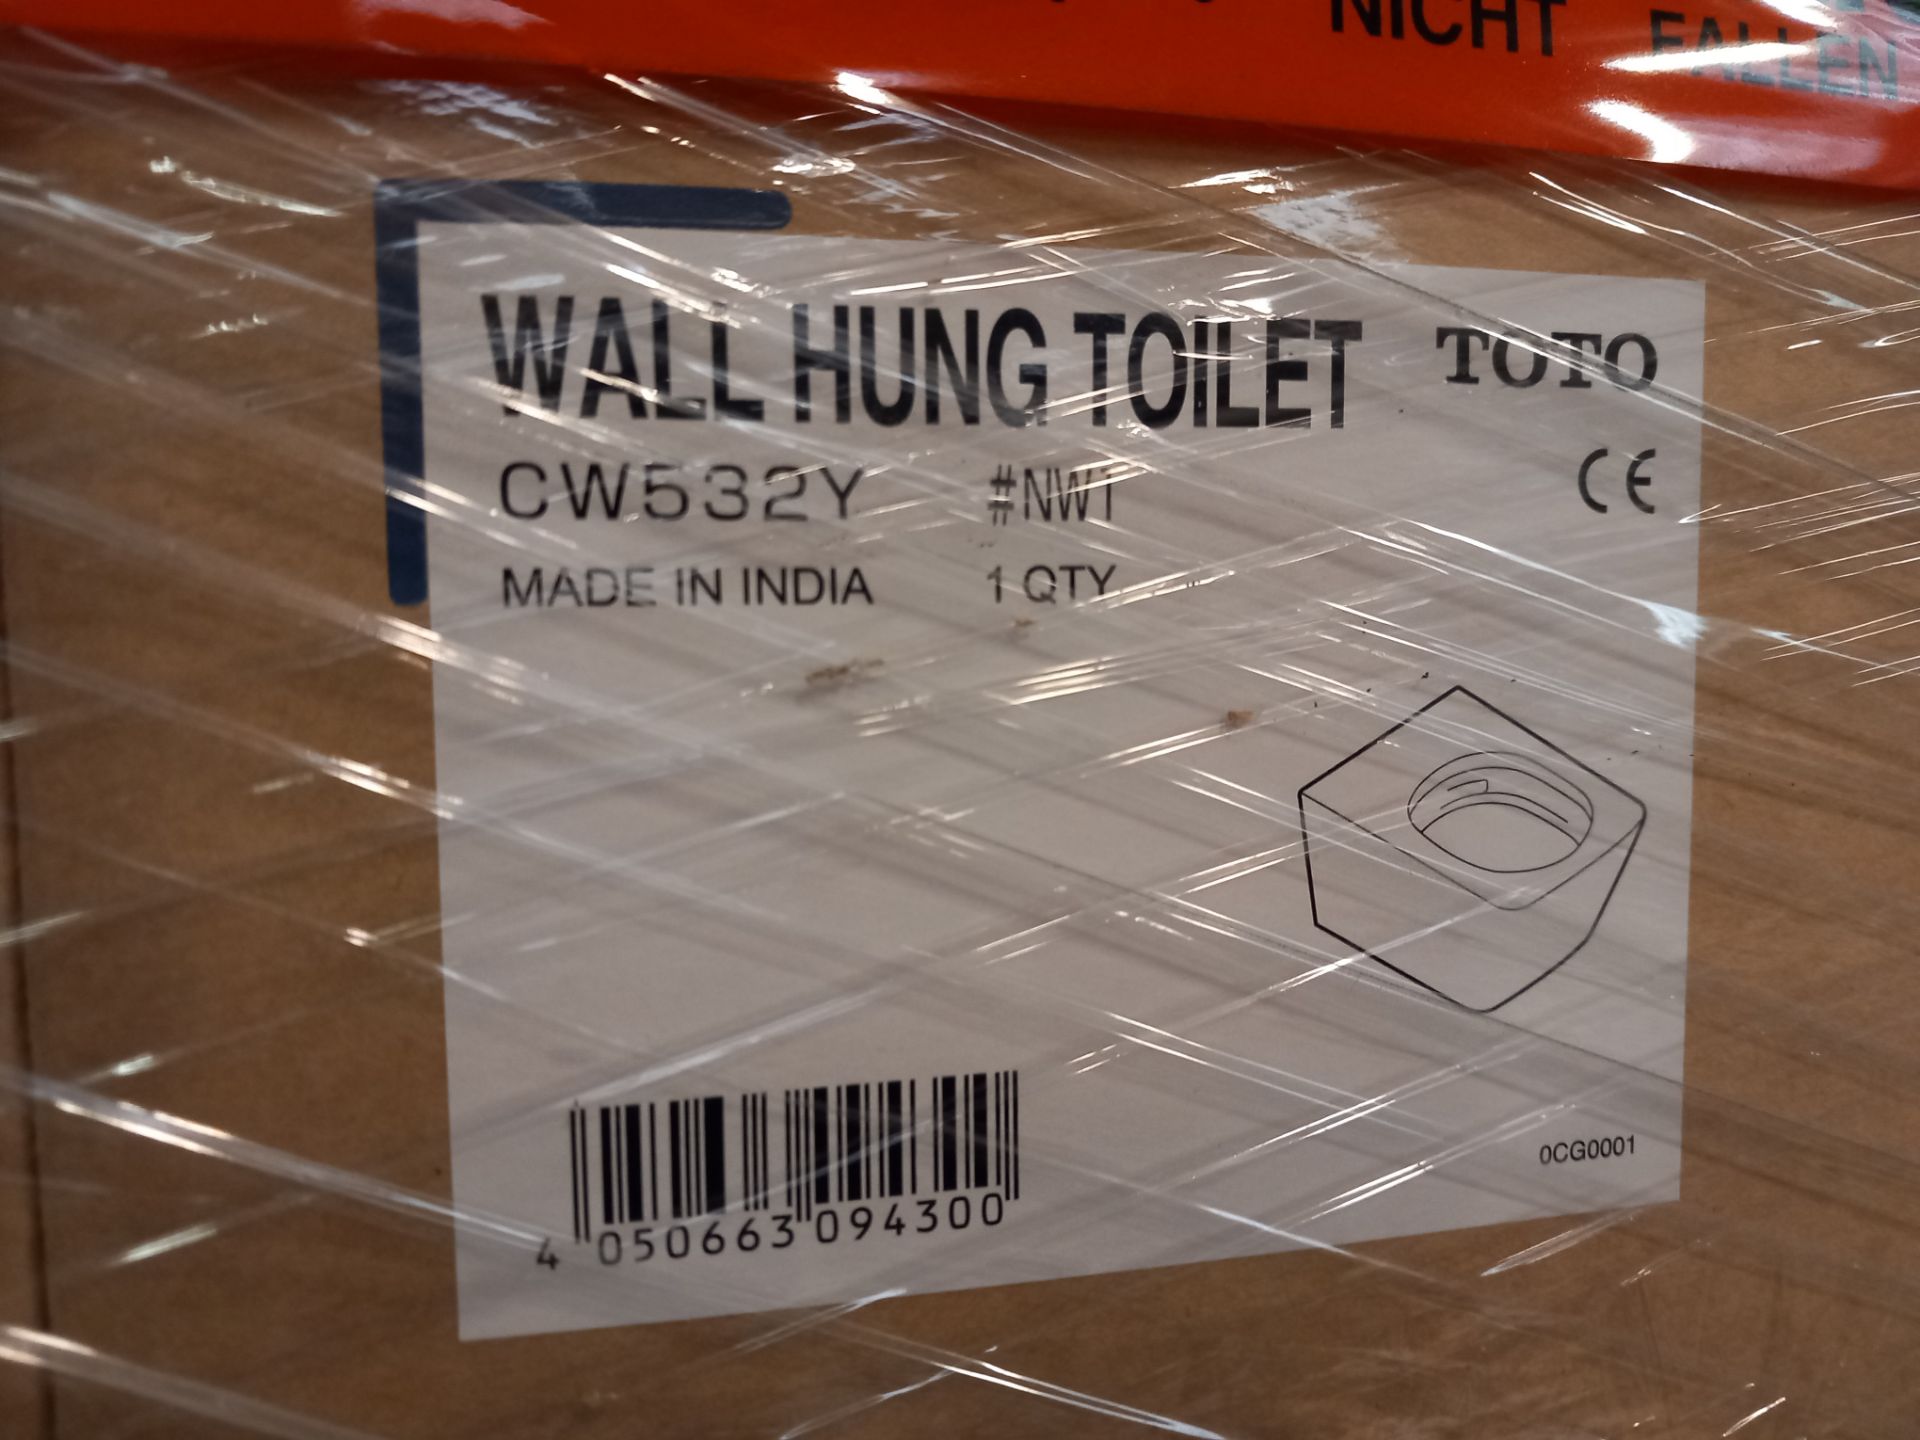 2x Toto CW532Y wall hung toilet (library photograph for information only) - Image 2 of 3